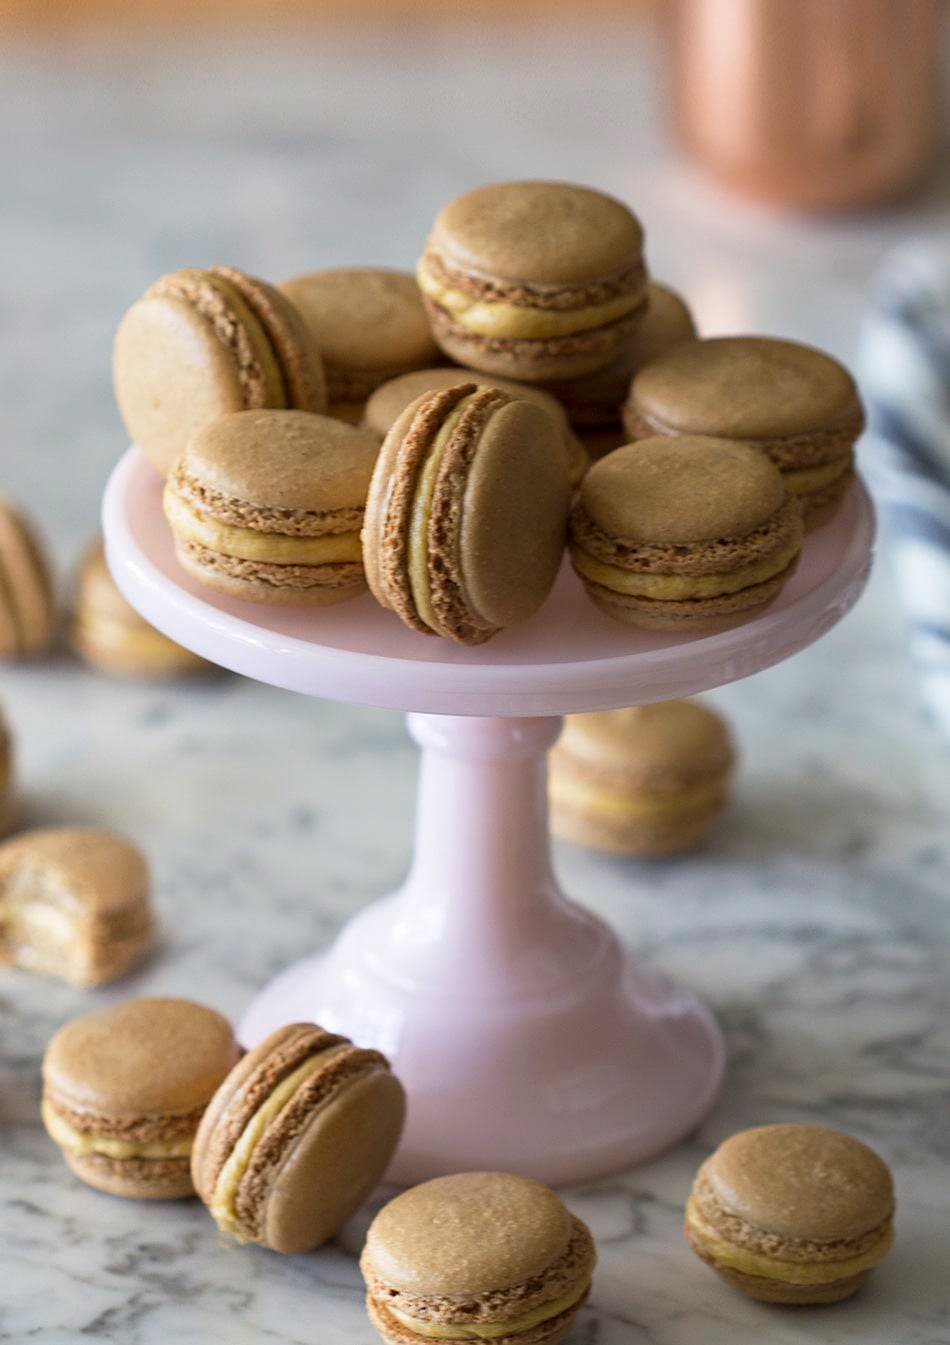 Pumpkin macarons piled onto a cake plate with others surrounding it.